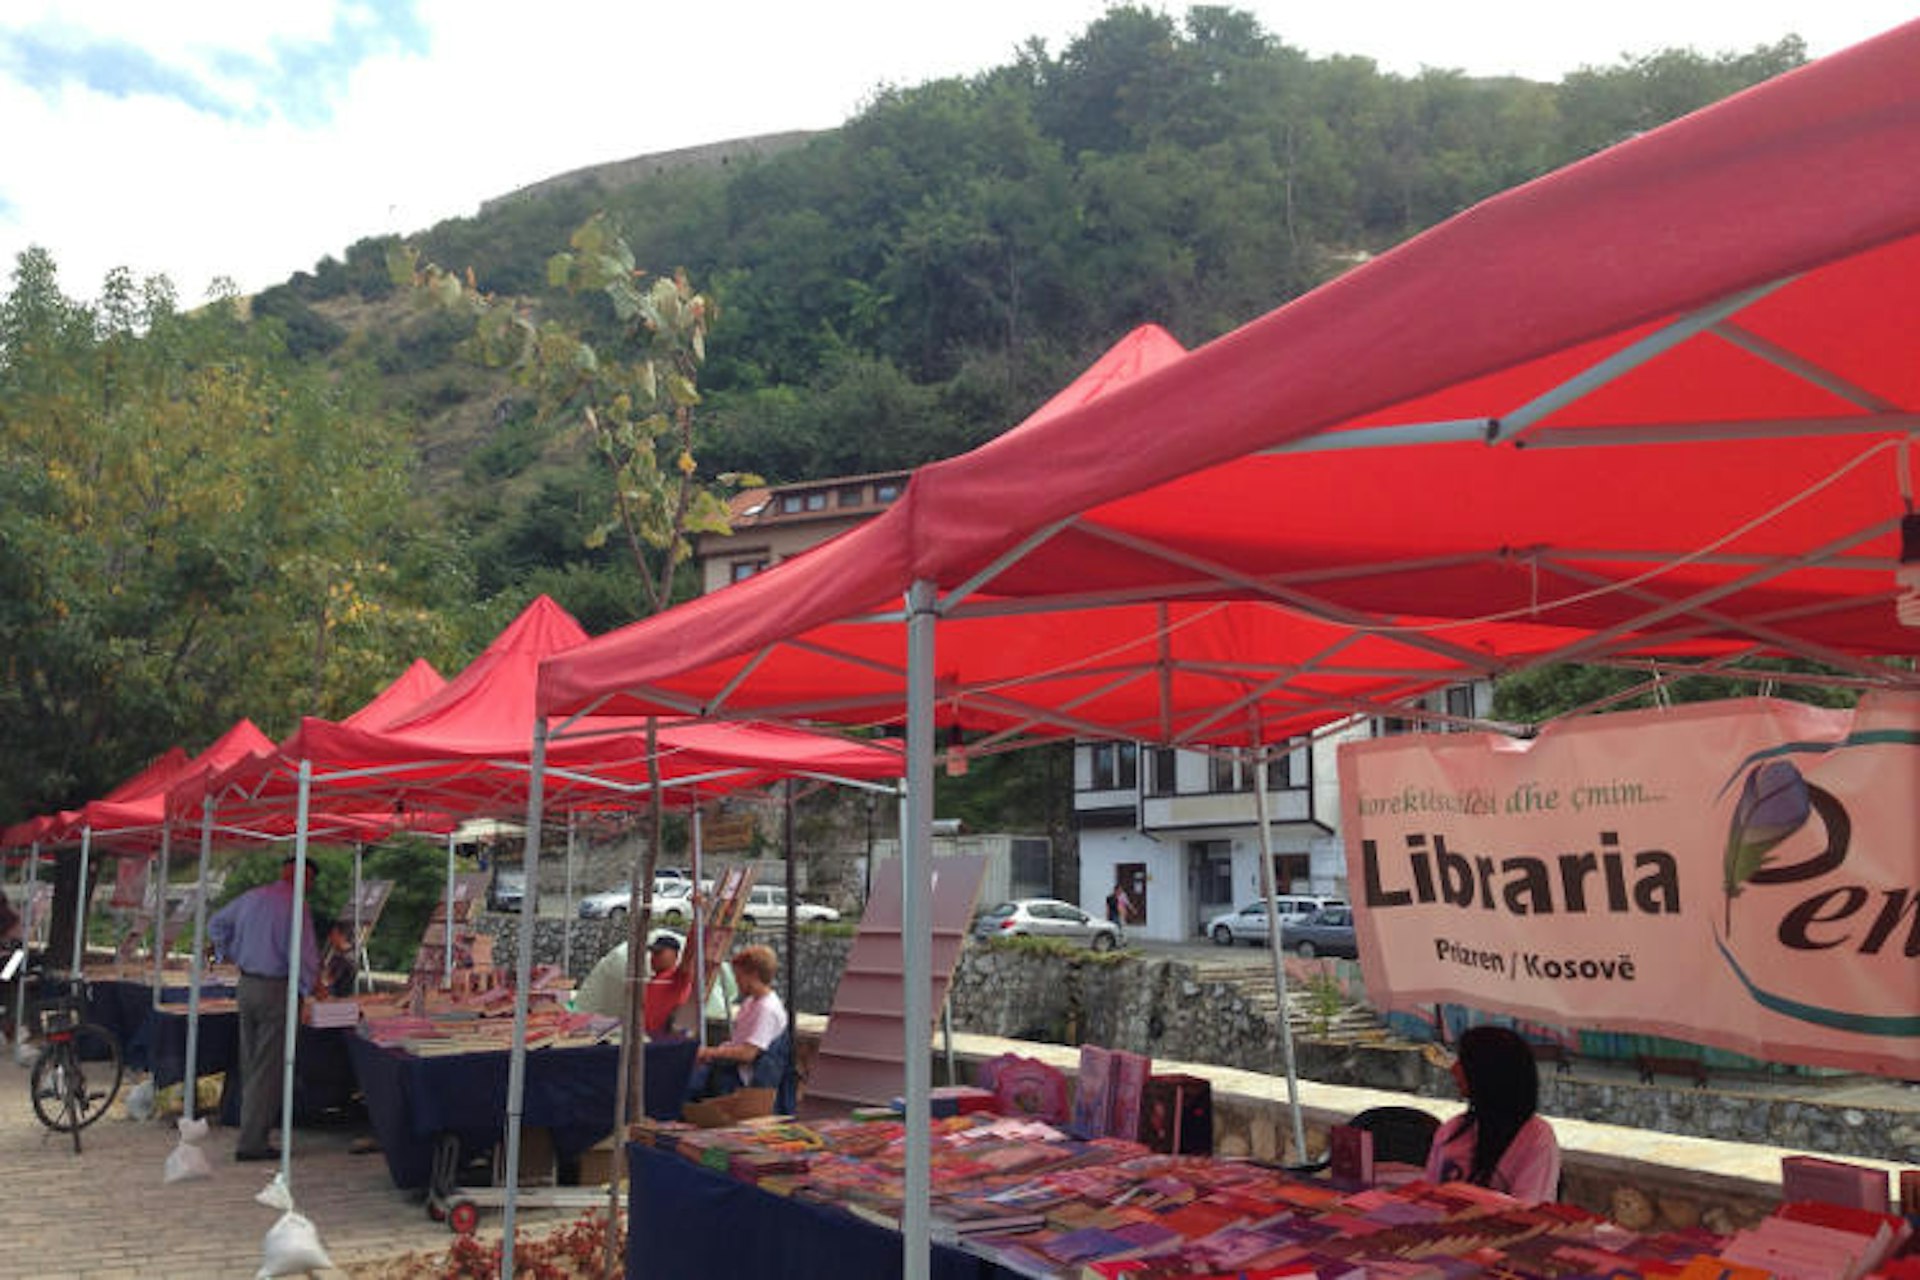 Dokufest and booksellers mark the cultural summer in Prizren. Image by Brana Vladisavljevic / Lonely Planet